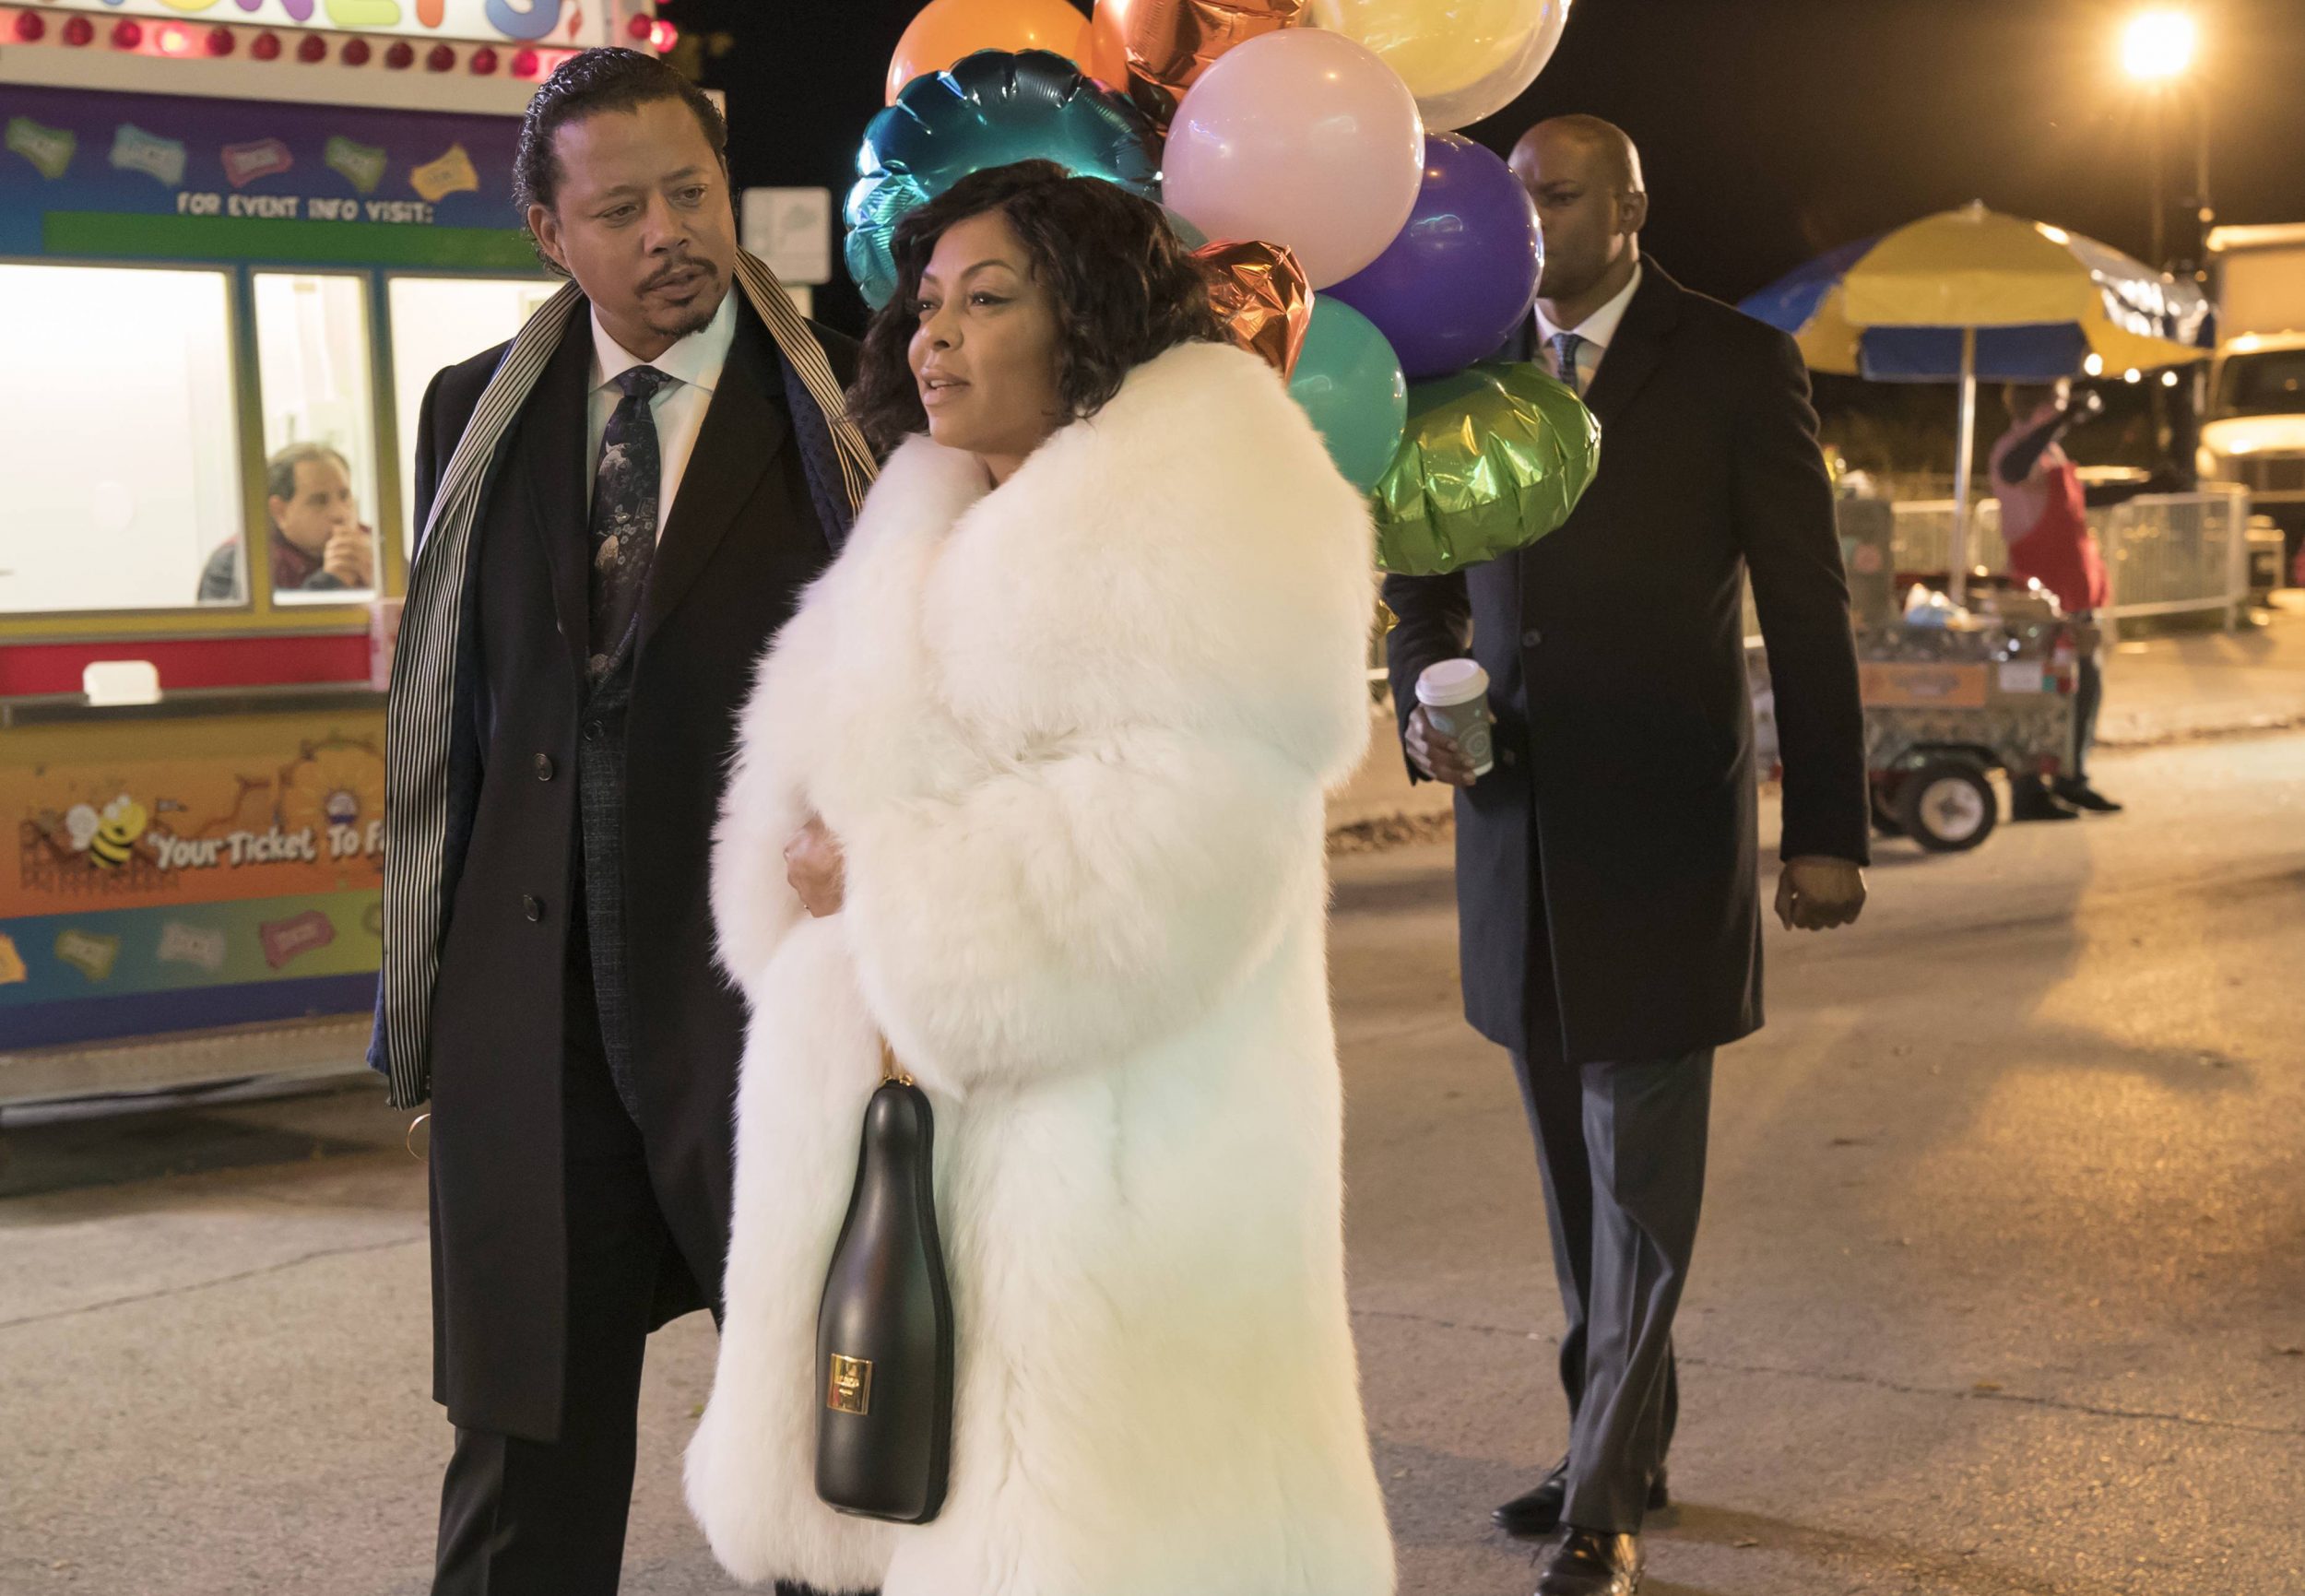 EMPIRE: Pictured L-R: Terrence Howard and Taraji P. Henson in the "A Furnace For your Foe" fall finale episode of EMPIRE airing Dec. 14 (8:00-9:00 PM ET/PT) on FOX. ©2016 Fox Broadcasting Co. CR: Chuck Hodes/FOX